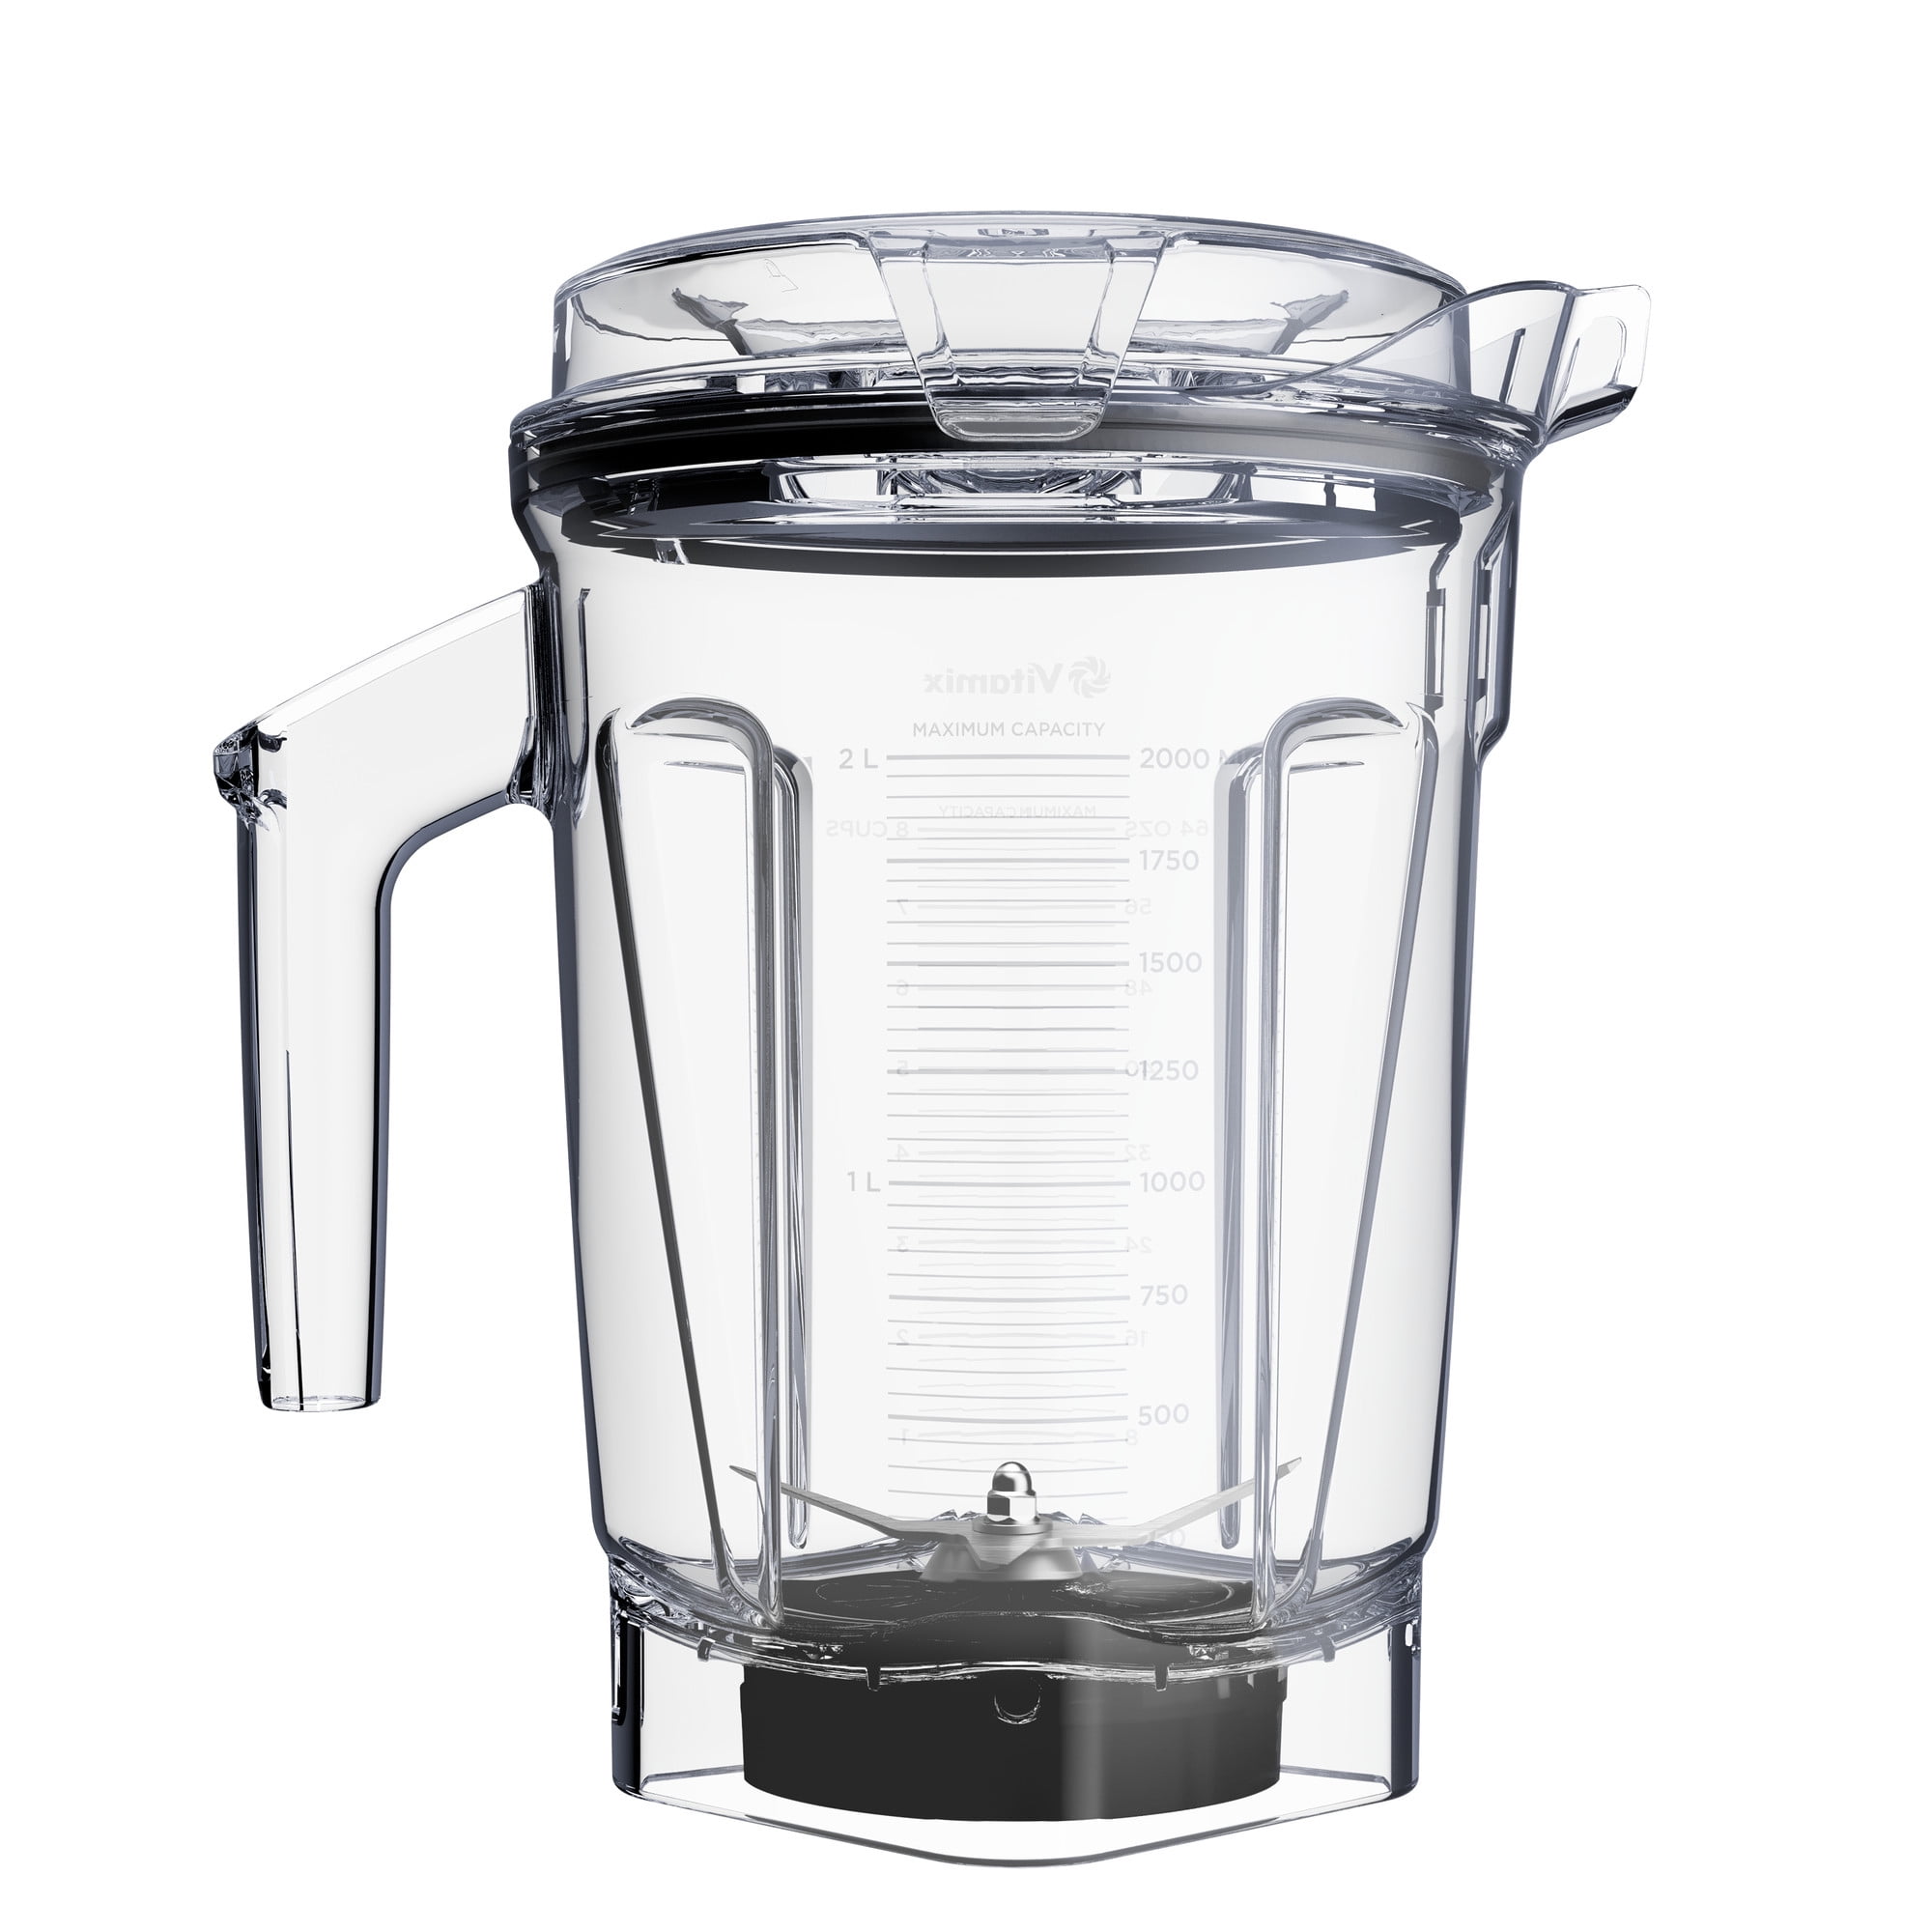 Vitamix A3500 Ascent Blender White with Gold Accents, Austin, TX